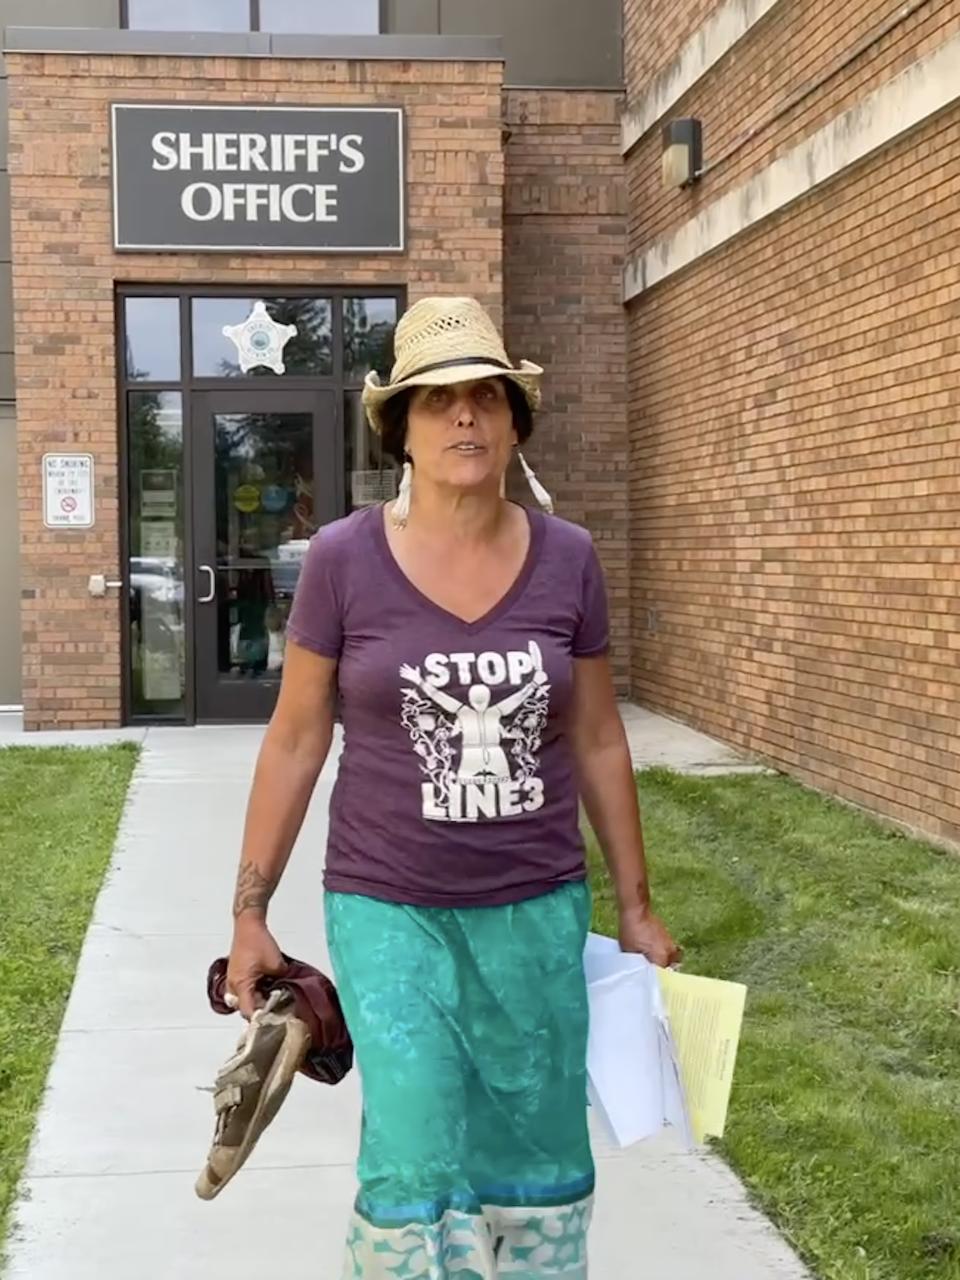 Winona LaDuke, executive director of Honor the Earth, was released from Aitkin County Jail on Thursday, July 22, for violating conditions of release. She spent three days in custody for charges stemming from  demonstrating against Line 3 in northern Minnesota. (Photo/Sarah Little Redfeather)